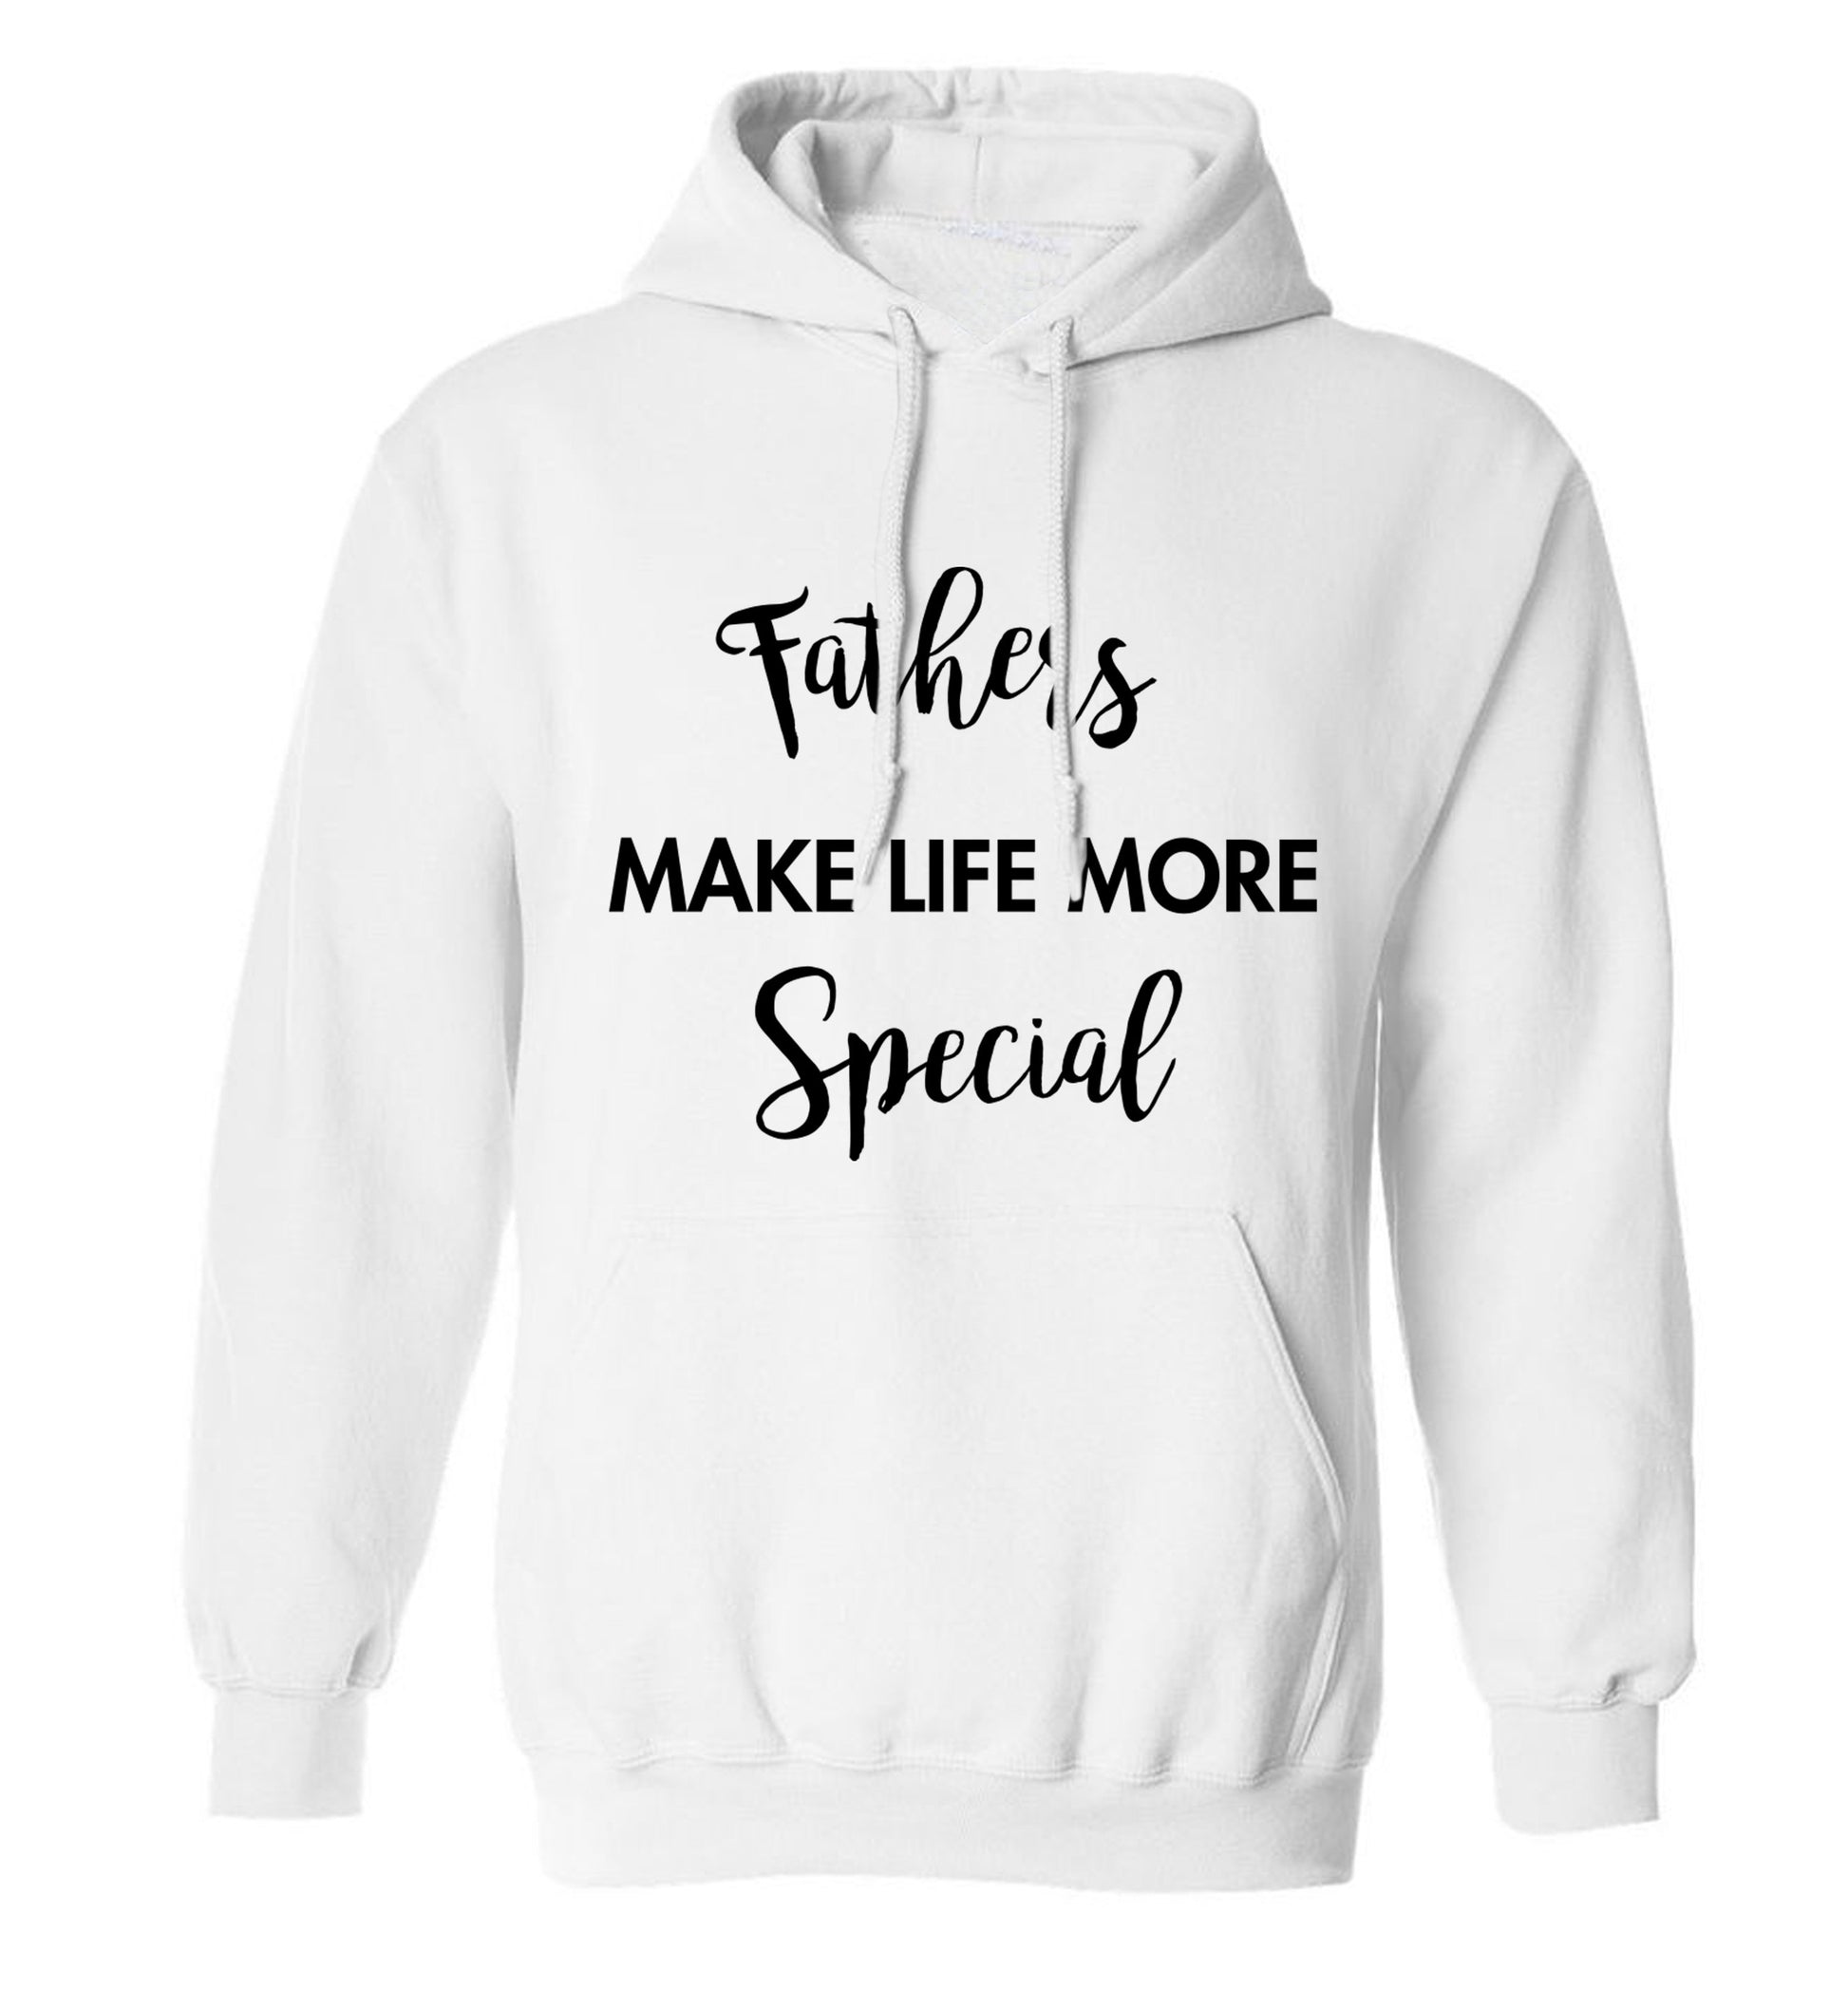 Fathers make life more special adults unisex white hoodie 2XL